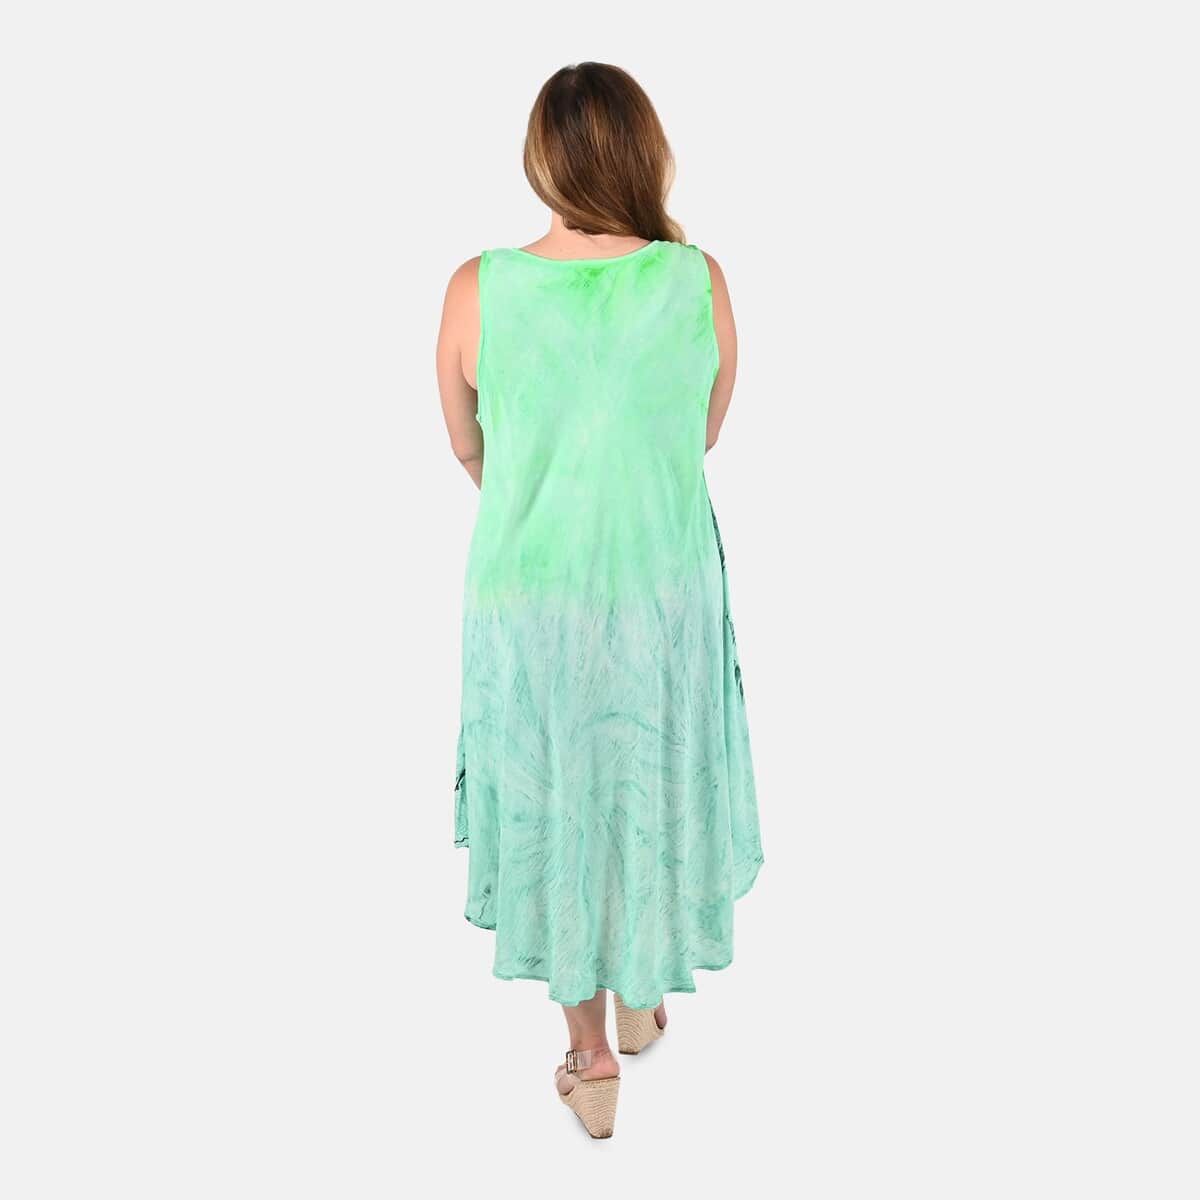 Tamsy Mint Green and Turquoise Embroidered Tie Dye Umbrella Dress - One Size Plus | Women's Dress | Summer Dress | Western Dress | Sleeveless Dress image number 1